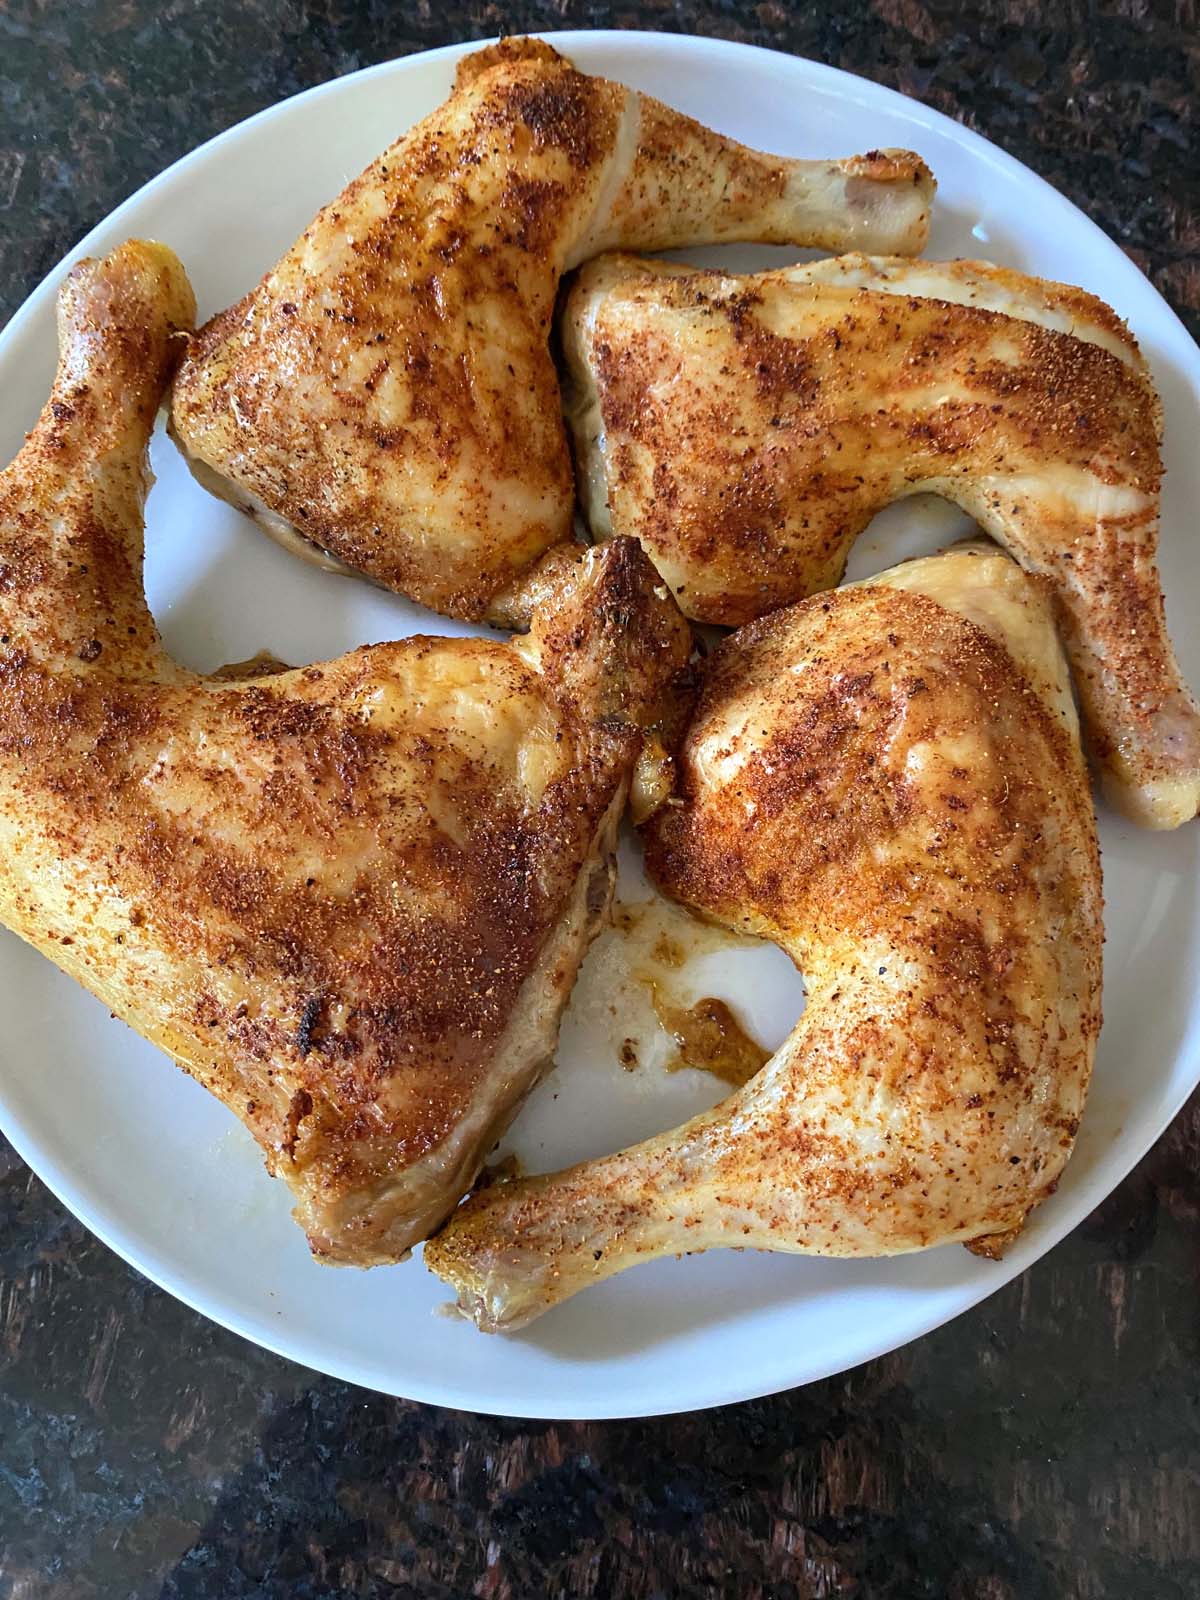 Whole Chicken, Quartered, ~3lbs